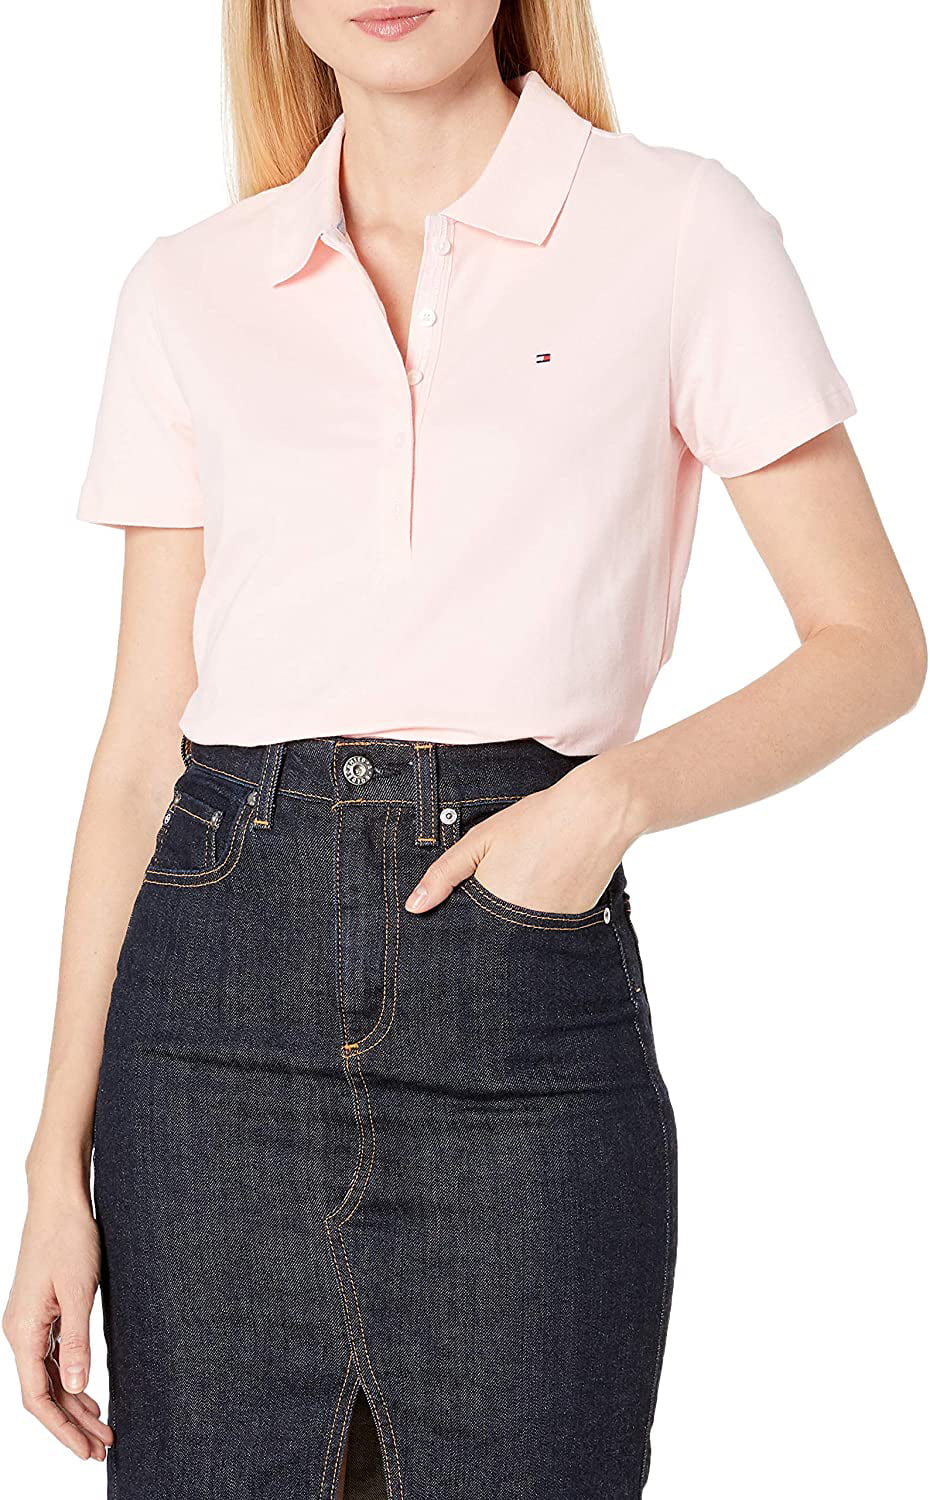 tommy hilfiger polo top